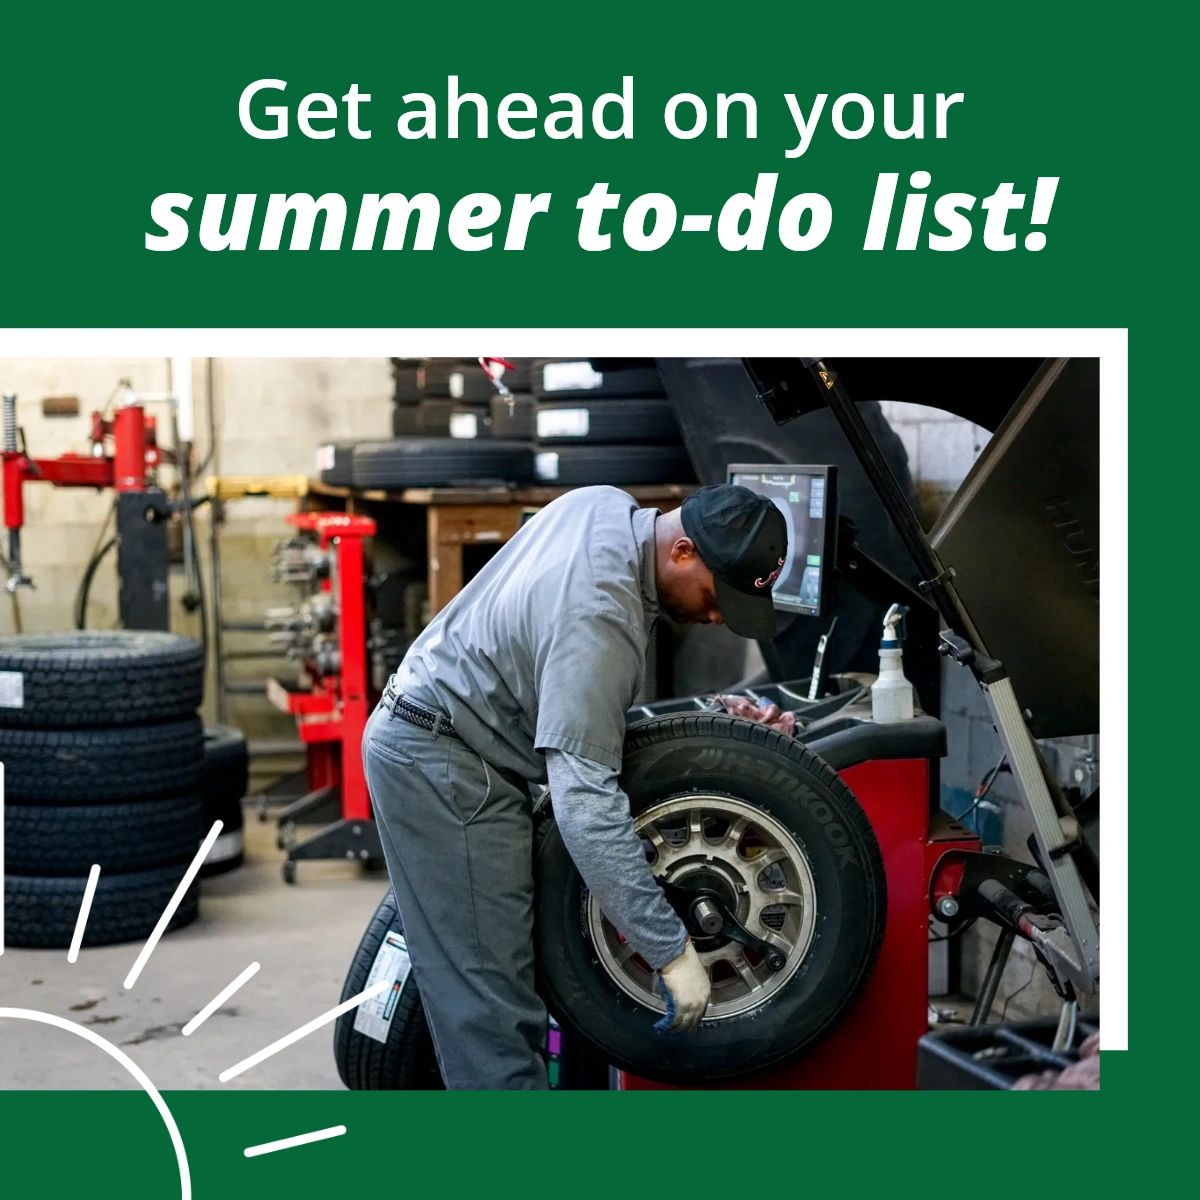 It’s the first day of #summer, which means that road trip season is officially here! From tire rotations to alignments and replacements, we’ll set you up with everything you need to drive this season. ☀️ #HamrickTire #NewTires #TireSales #PhenixCityAL #FortBenning #PhenixCity